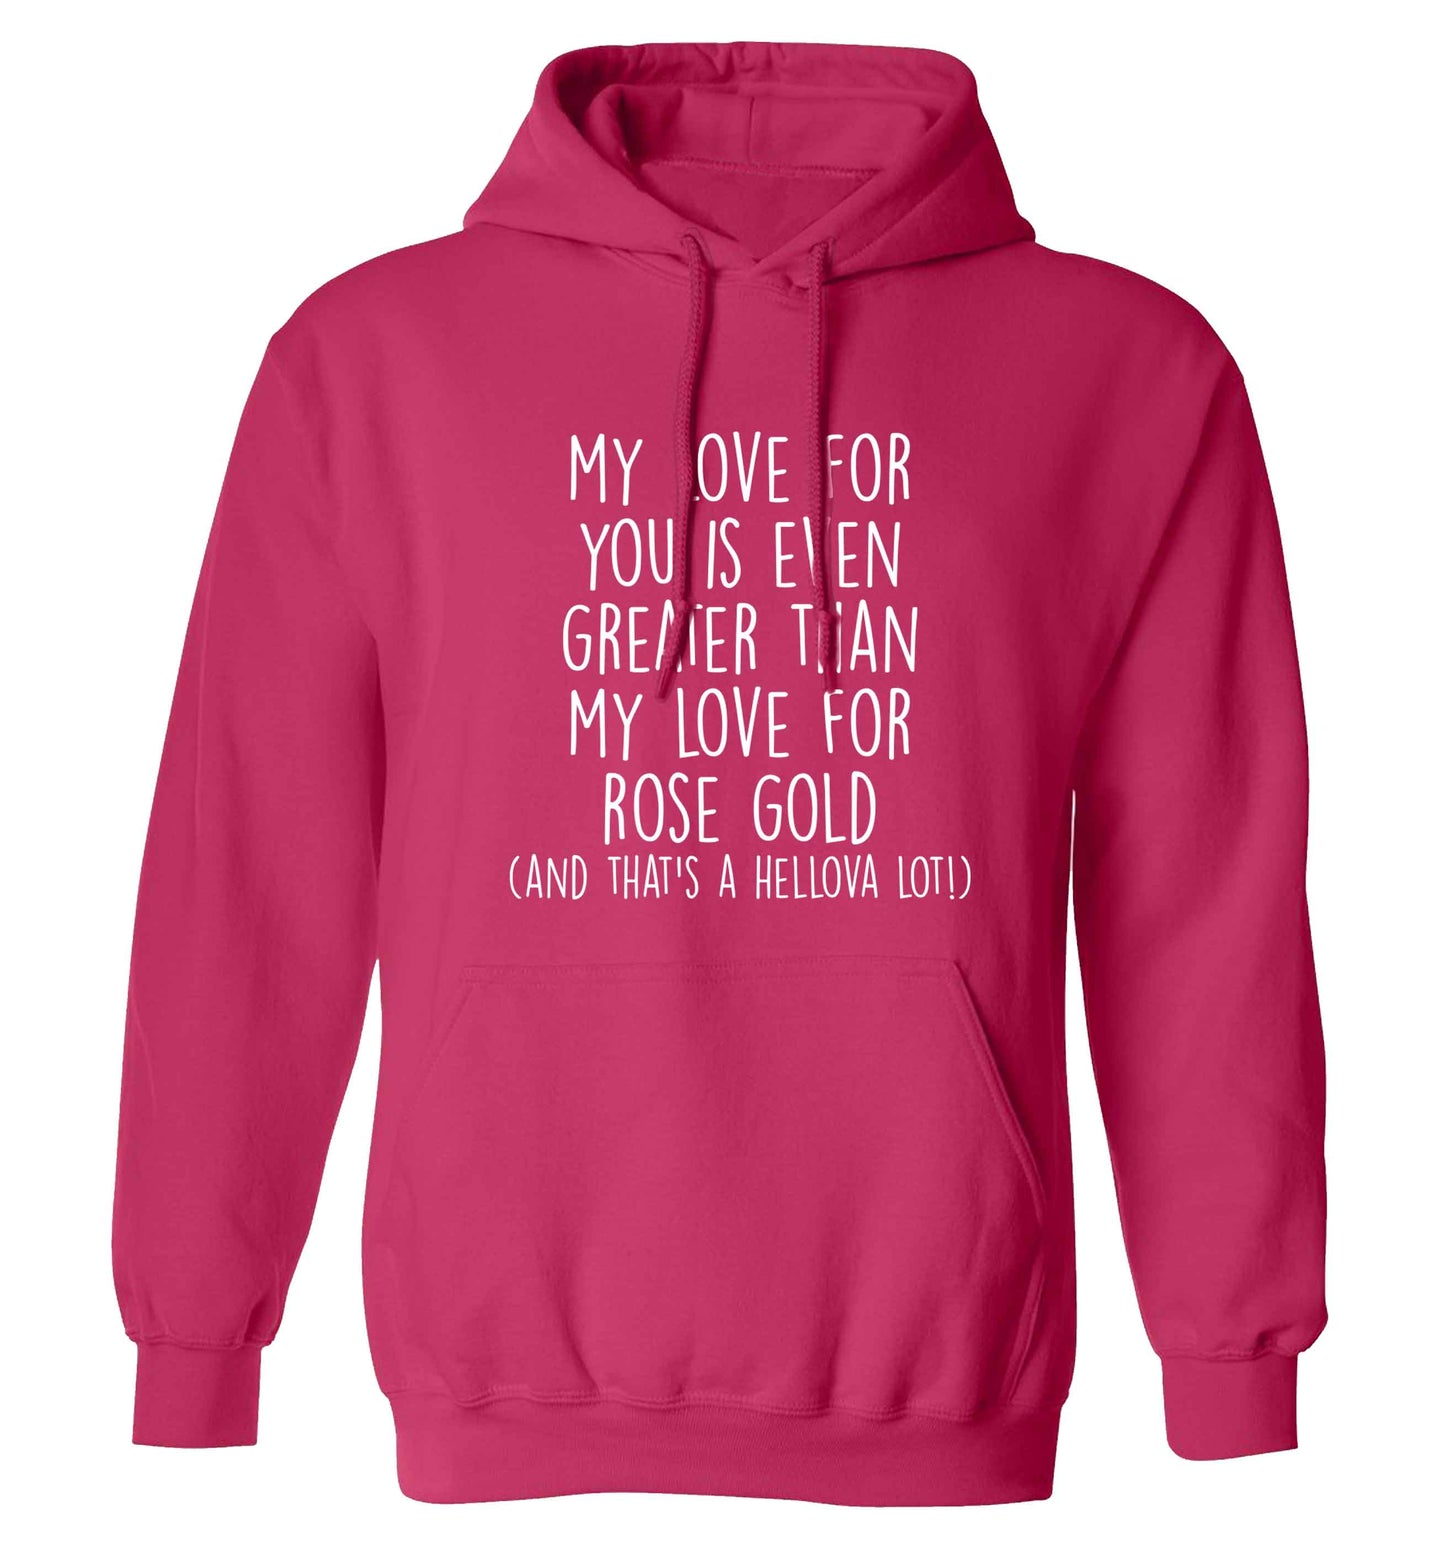 My love for you is even greater than my love for rose gold (and that's a hellova lot) adults unisex pink hoodie 2XL